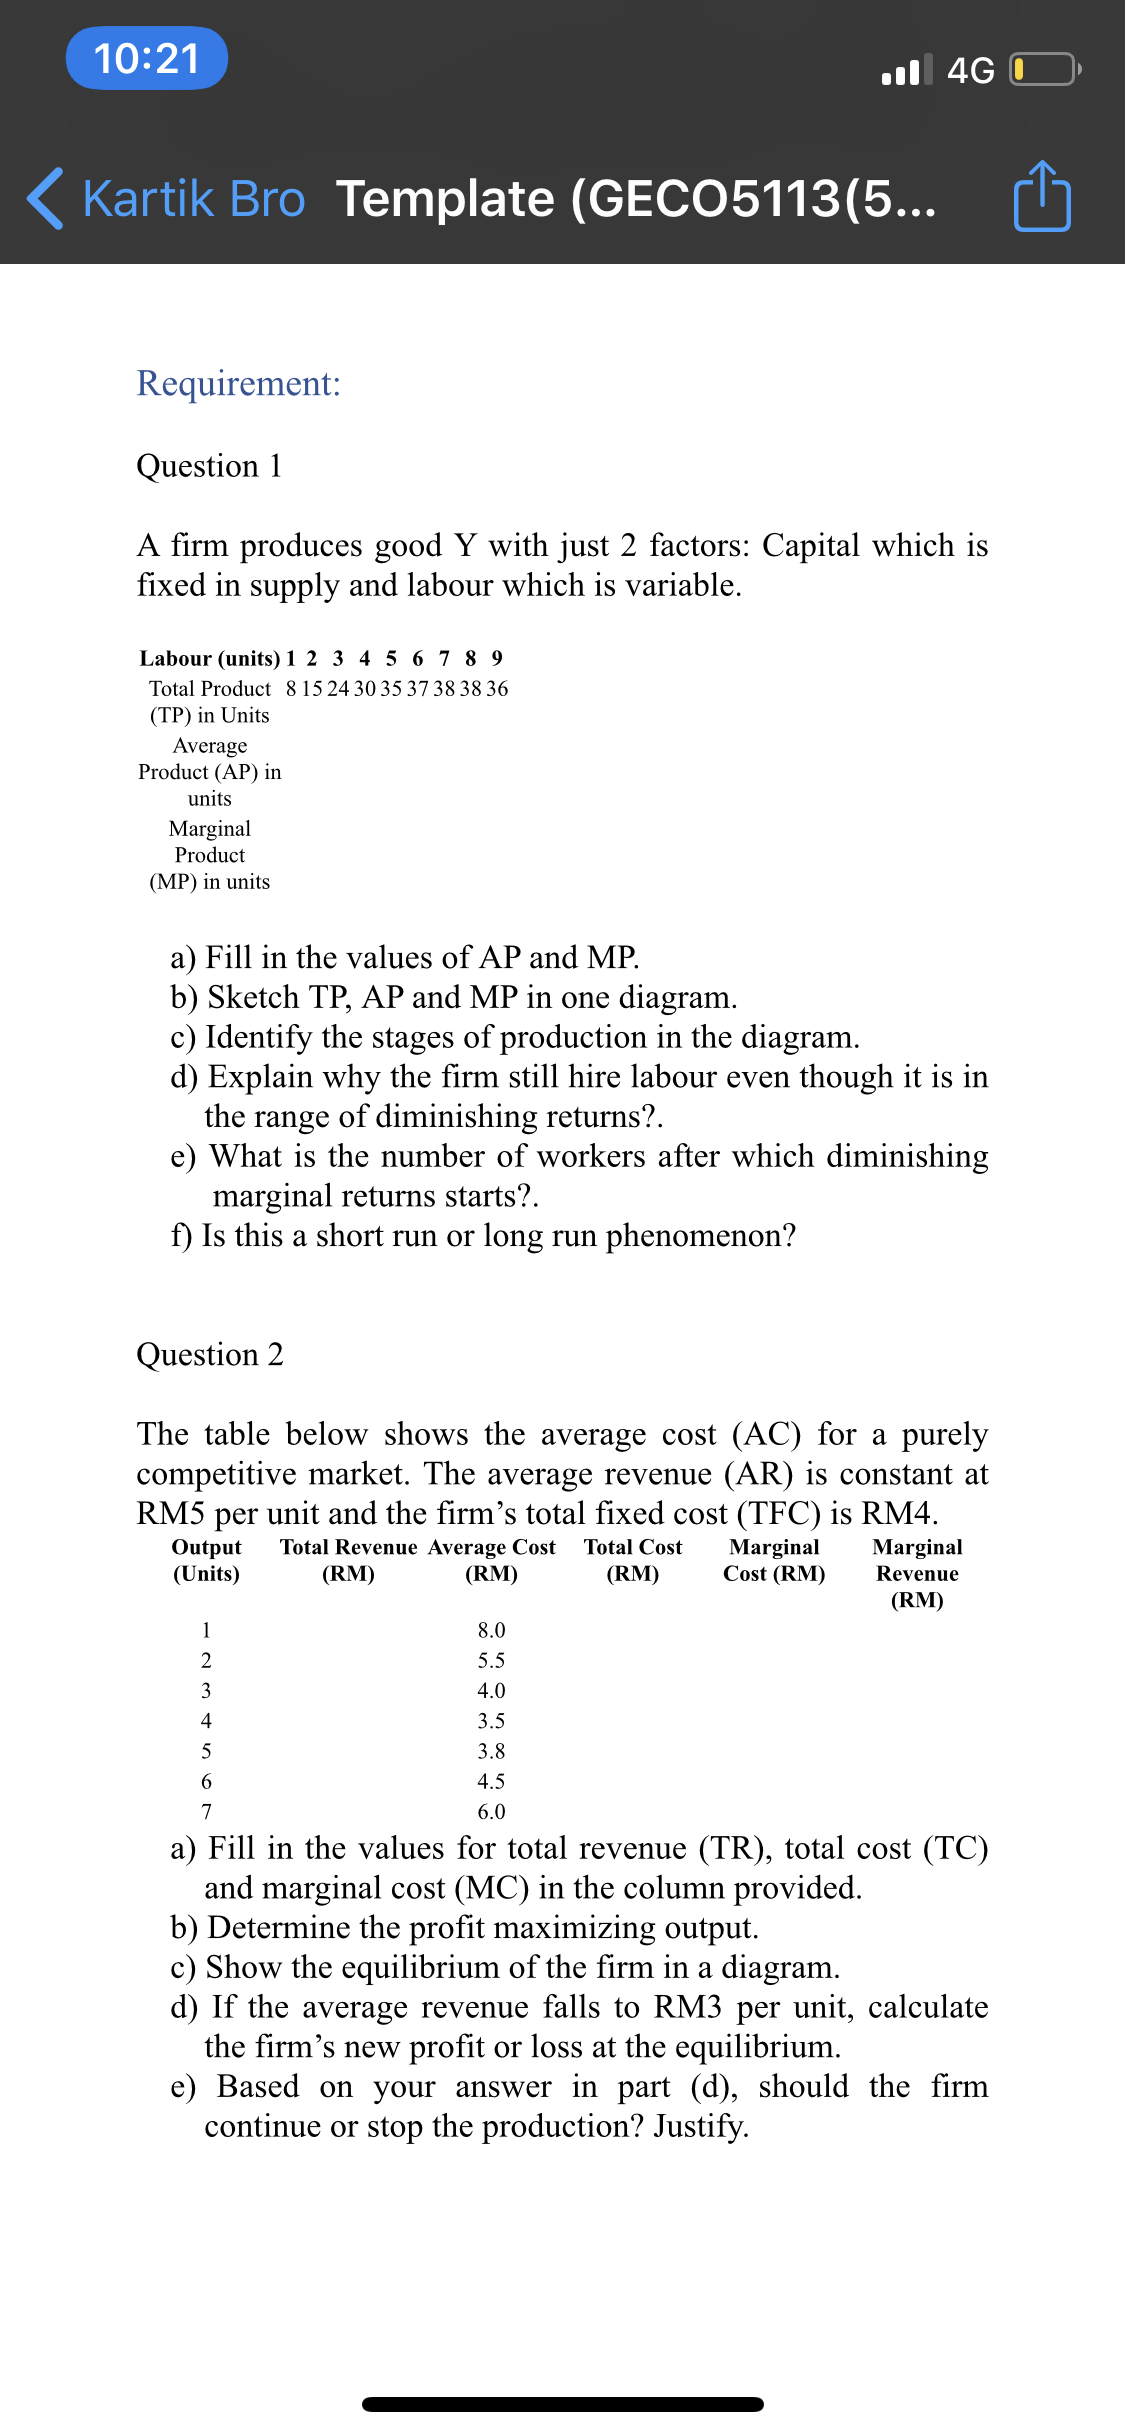 10:21
l 4G O
( Kartik Bro Template (GECO5113(5...
Requirement:
Question 1
A firm produces good Y with just 2 factors: Capital which is
fixed in supply and labour which is variable.
Labour (units) 1 2 3 4 5 6 7 8 9
Total Product 8 15 24 30 35 37 38 38 36
(TP) in Units
Average
Product (AP) in
units
Marginal
Product
(MP) in units
a) Fill in the values of AP and MP.
b) Sketch TP, AP and MP in one diagram.
c) Identify the stages of production in the diagram.
d) Explain why the firm still hire labour even though it is in
the range of diminishing returns?.
e) What is the number of workers after which diminishing
marginal returns starts?.
f) Is this a short run or long run phenomenon?
Question 2
The table below shows the average cost (AC) for a purely
competitive market. The average revenue (AR) is constant at
RM5 per unit and the firm's total fixed cost (TFC) is RM4.
Total Revenue Average Cost
Output
(Units)
Marginal
Cost (RM)
Total Cost
Marginal
(RM)
(RM)
(RM)
Revenue
(RM)
1
8.0
2
5.5
3
4.0
4
3.5
3.8
6.
4.5
7
6.0
a) Fill in the values for total revenue (TR), total cost (TC)
and marginal cost (MC) in the column provided.
b) Determine the profit maximizing output.
c) Show the equilibrium of the firm in a diagram.
d) If the average revenue falls to RM3 per unit, calculate
the firm's new profit or loss at the equilibrium.
e) Based on your answer in part (d), should the firm
continue or stop the production? Justify.
